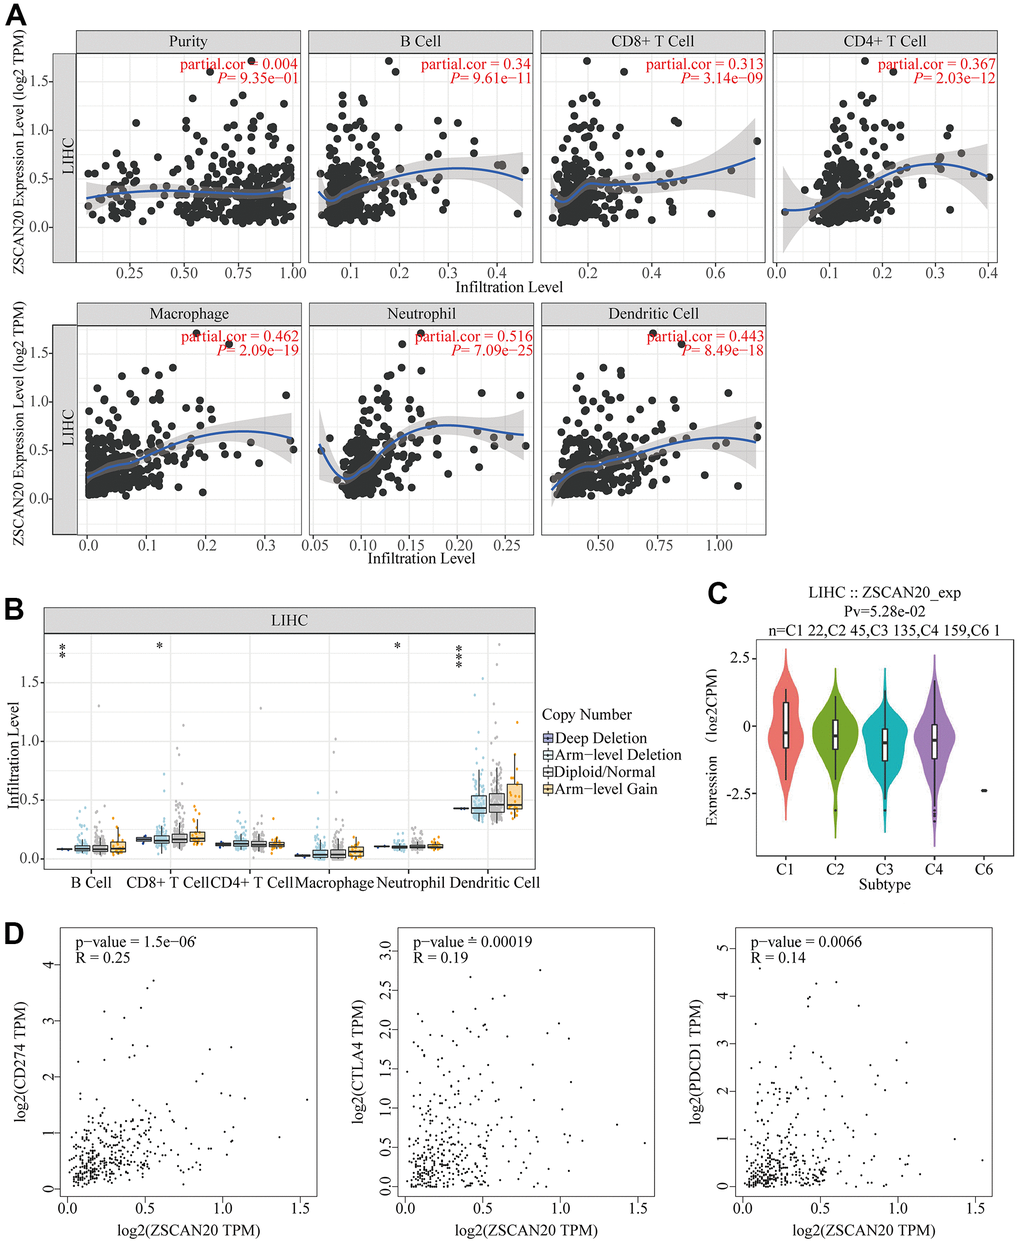 Association between ZSCAN20 and immune cell infiltration in HCC. (A) ZSCAN20 showed a significant correlation with the infiltrating abundance of B cell, CD8+ T cell, CD4+ T cell, Macrophage, Neutrophil, and Dendritic cell using the TIMER database. (B) The relationship between ZSCAN20 CNV and immune infiltration.*p C) Distribution of ZSCAN20 expression across immune subtypes in LIHC (TISIDB). The different color plots represent the five immune subtypes (C1: wound healing; C2: IFN-gamma dominant; C3: inflammatory; C4: lymphocyte-depleted and C6: TGF-b dominant). (D) Scatter plots of the correlations between ZSCAN20 expression and CD274, CTLA4 and PDCD1 in LIHC using the GEPIA database.